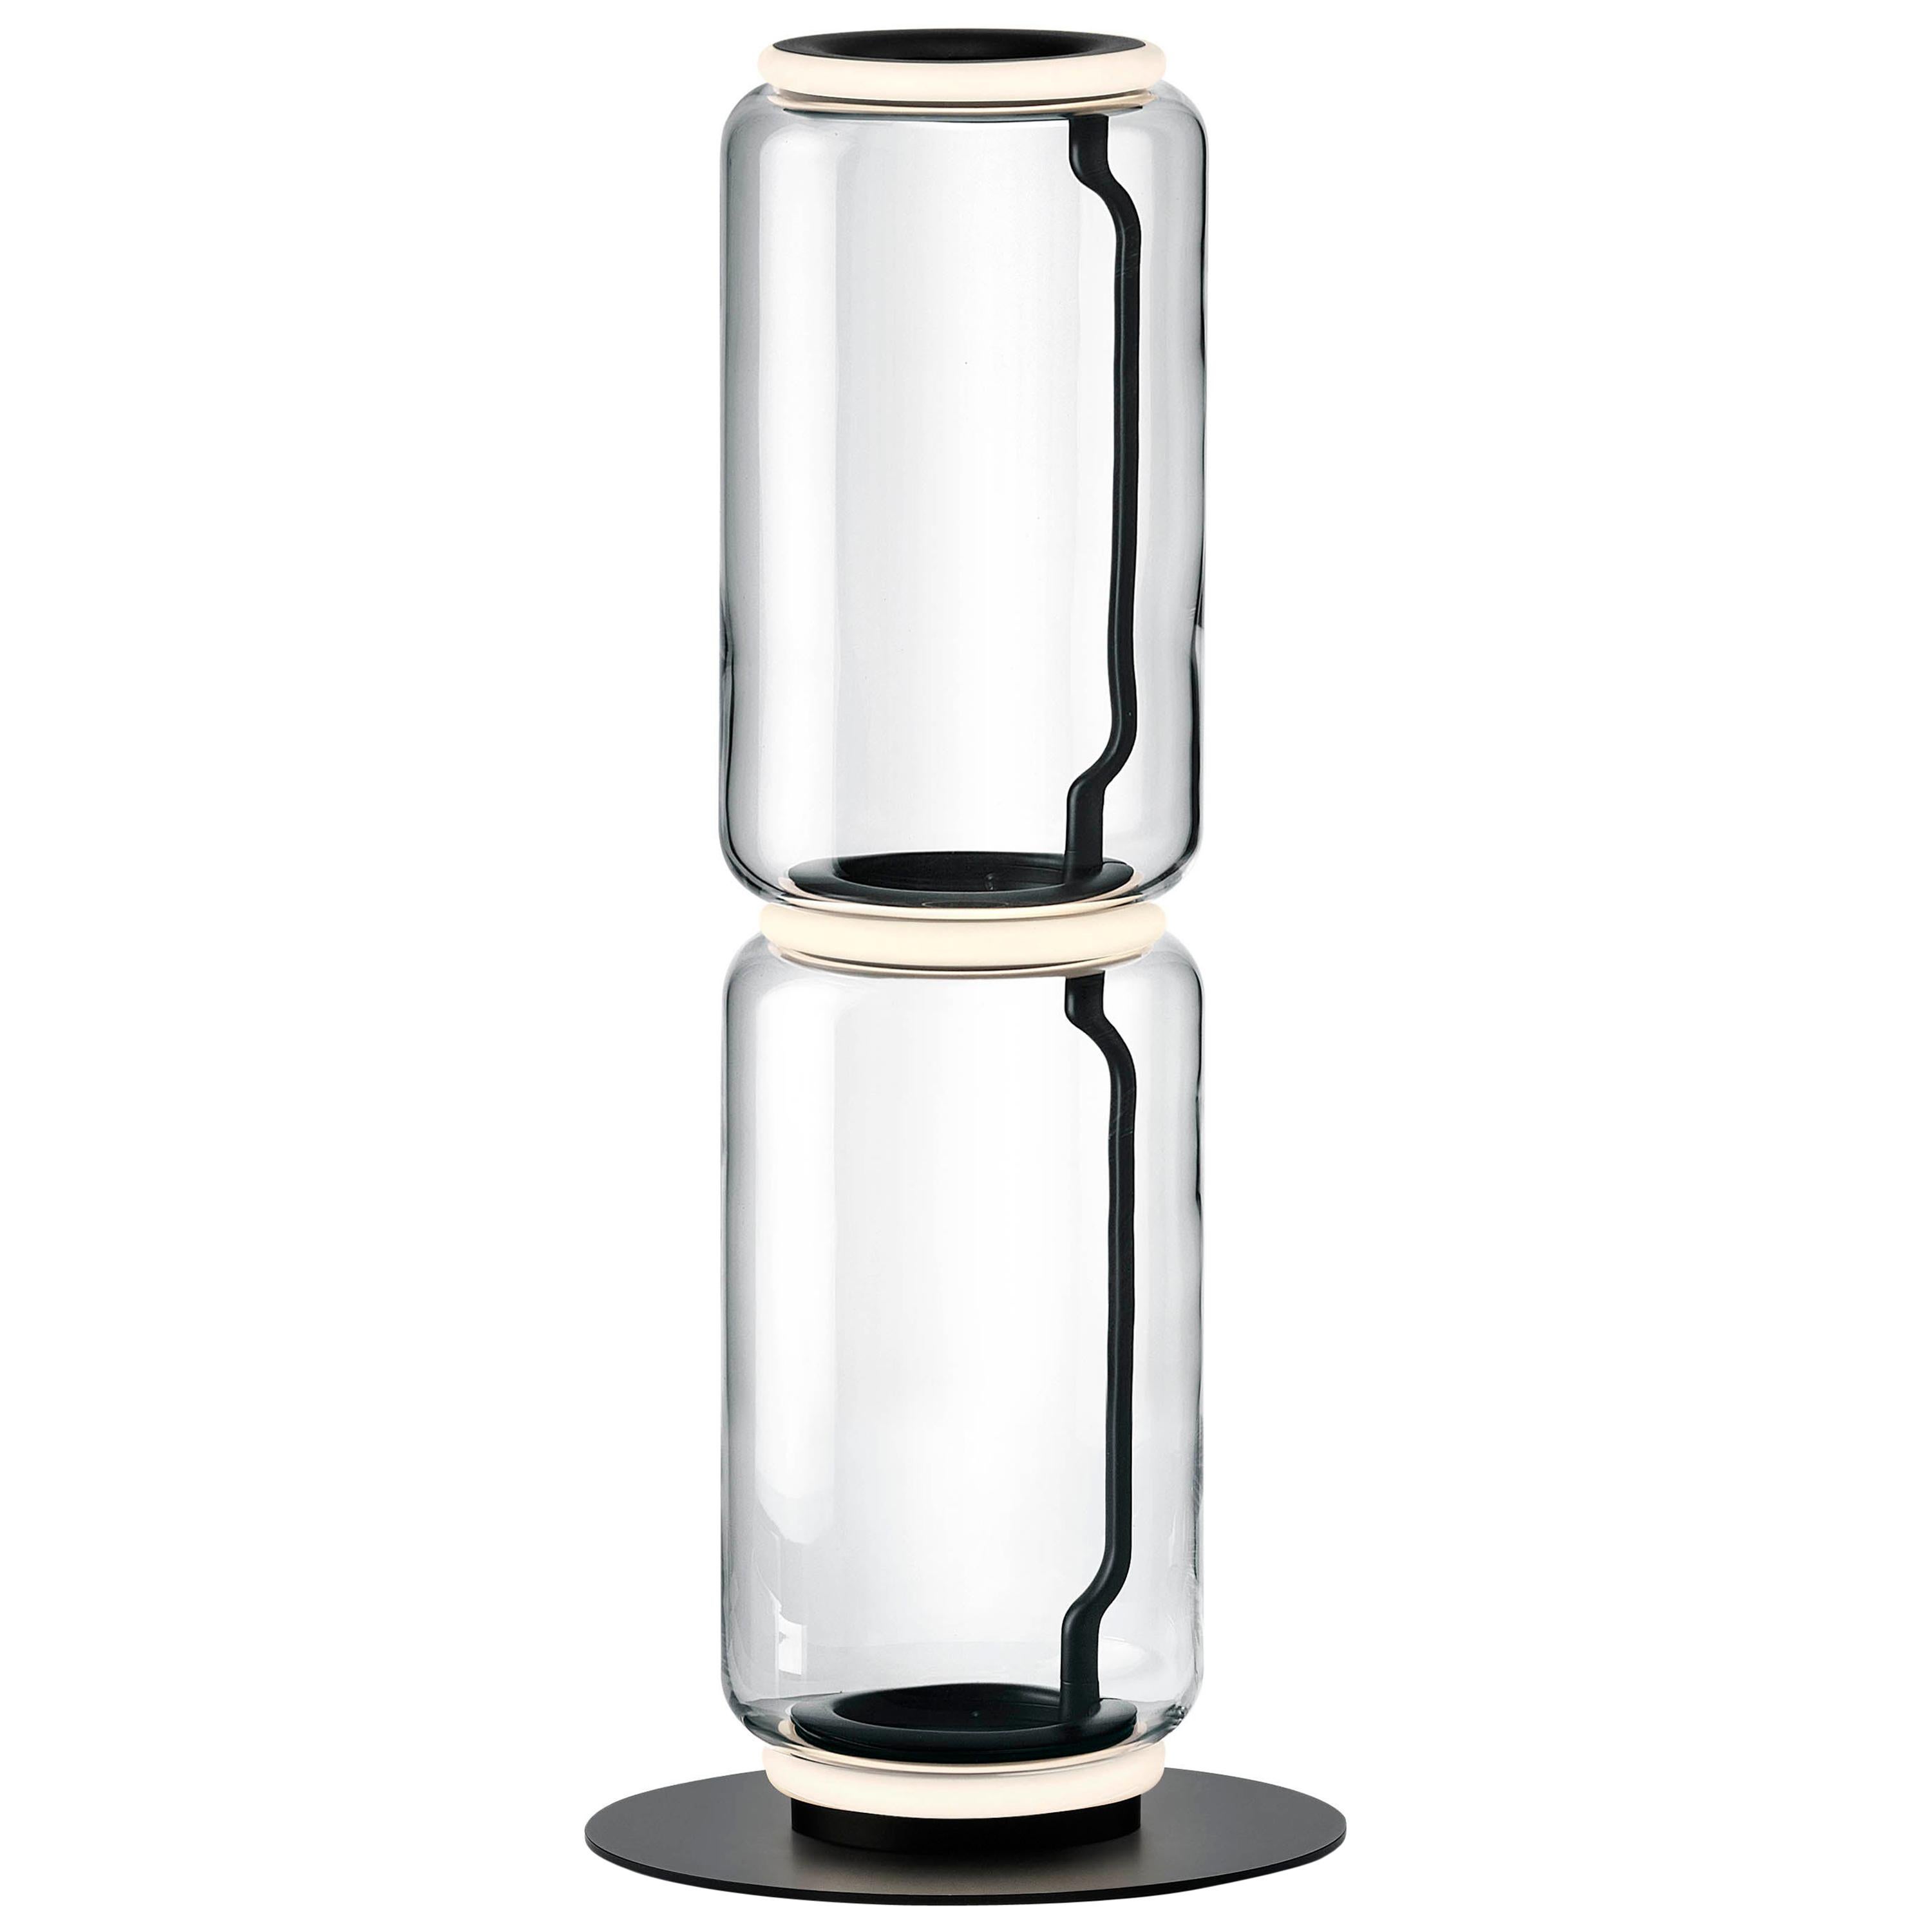 Flos Noctambule Floor Lamp with 2 Cylinders and Base by Konstantin Grcic